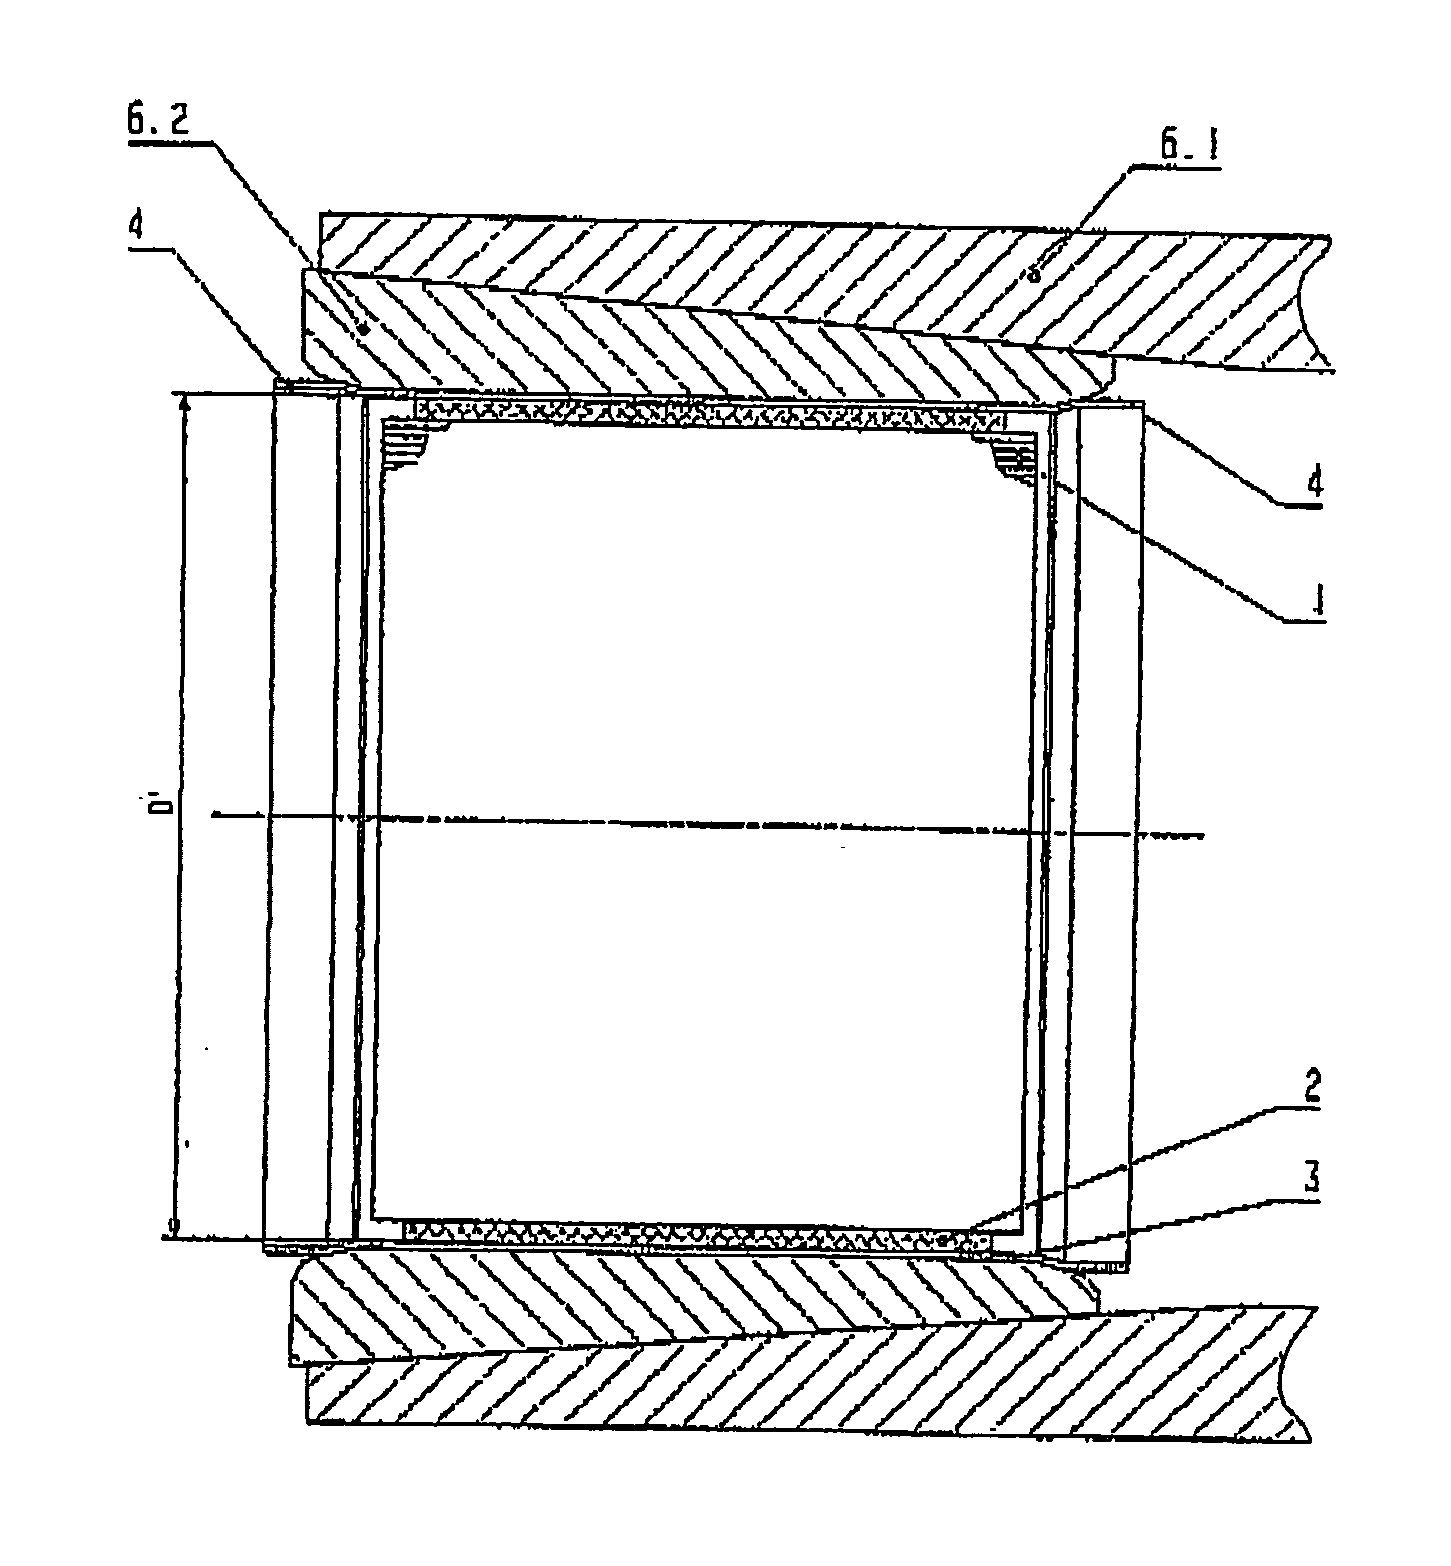 Method for inserting a ceramic functional body in a tubular metal housing and a device thus produced